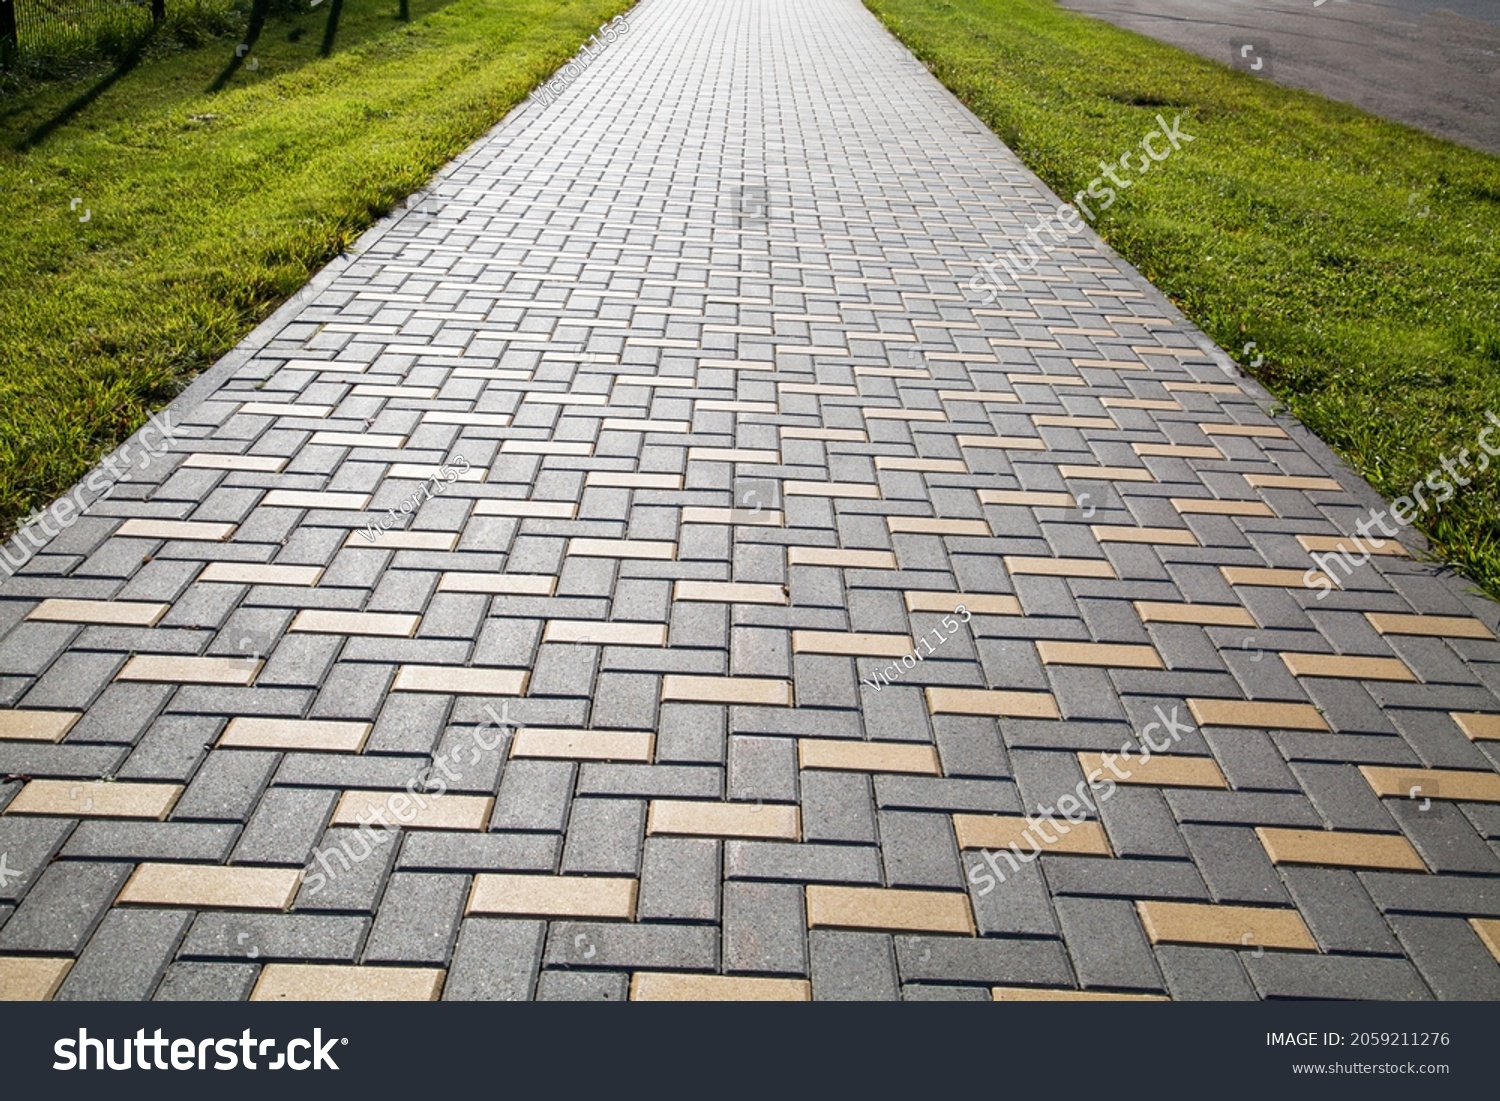 A sidewalk made of rectangular artificial stone extending into the distance in yellow and gray with a green lawn, texture backgrounds for graphic design. Abstract wallpaper. #2059211276